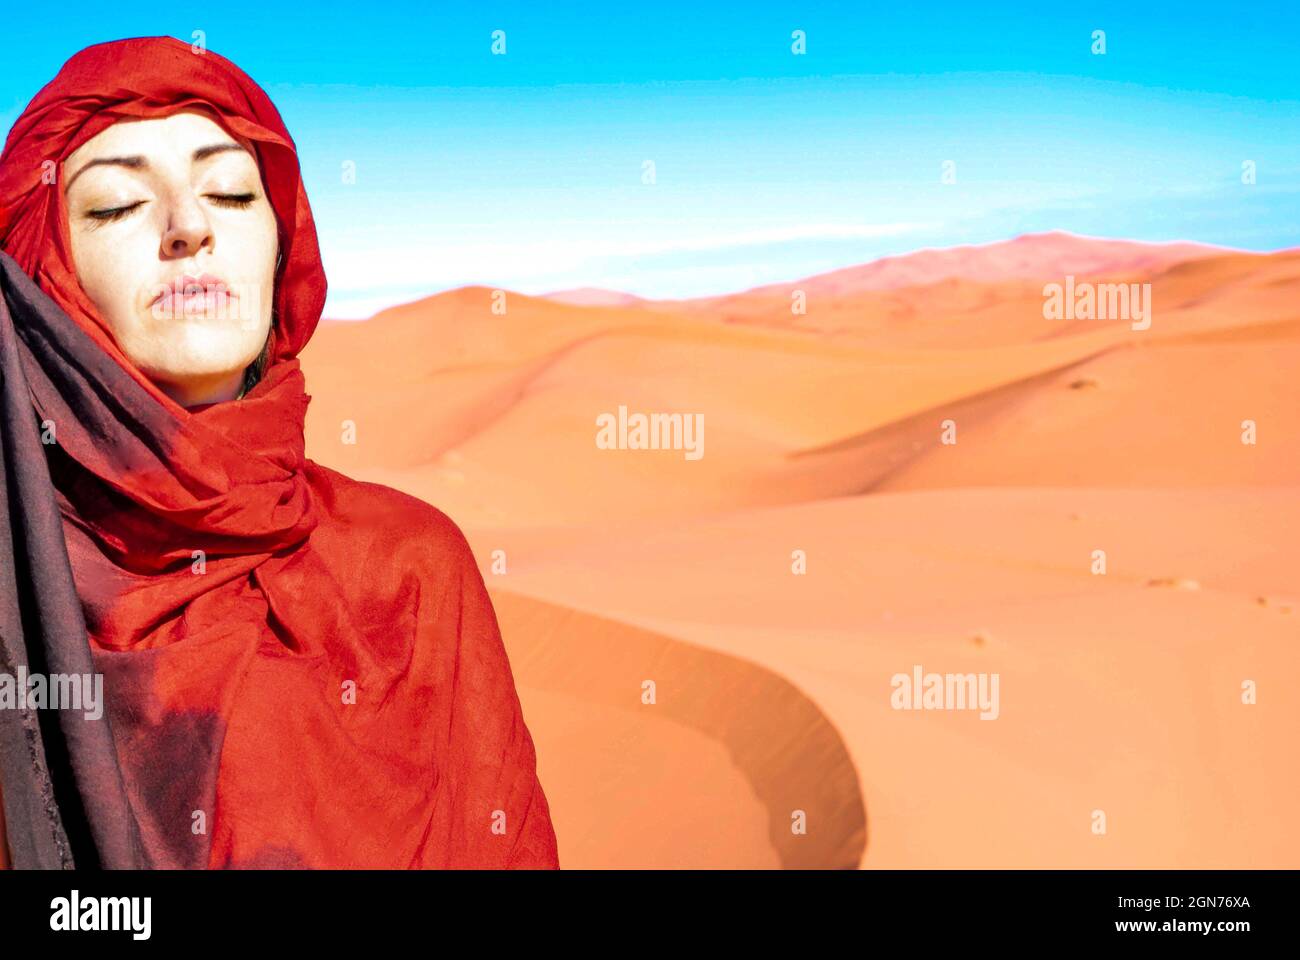 Portrait of a Caucasian woman meditating with a red headscarf in the desert sun Stock Photo